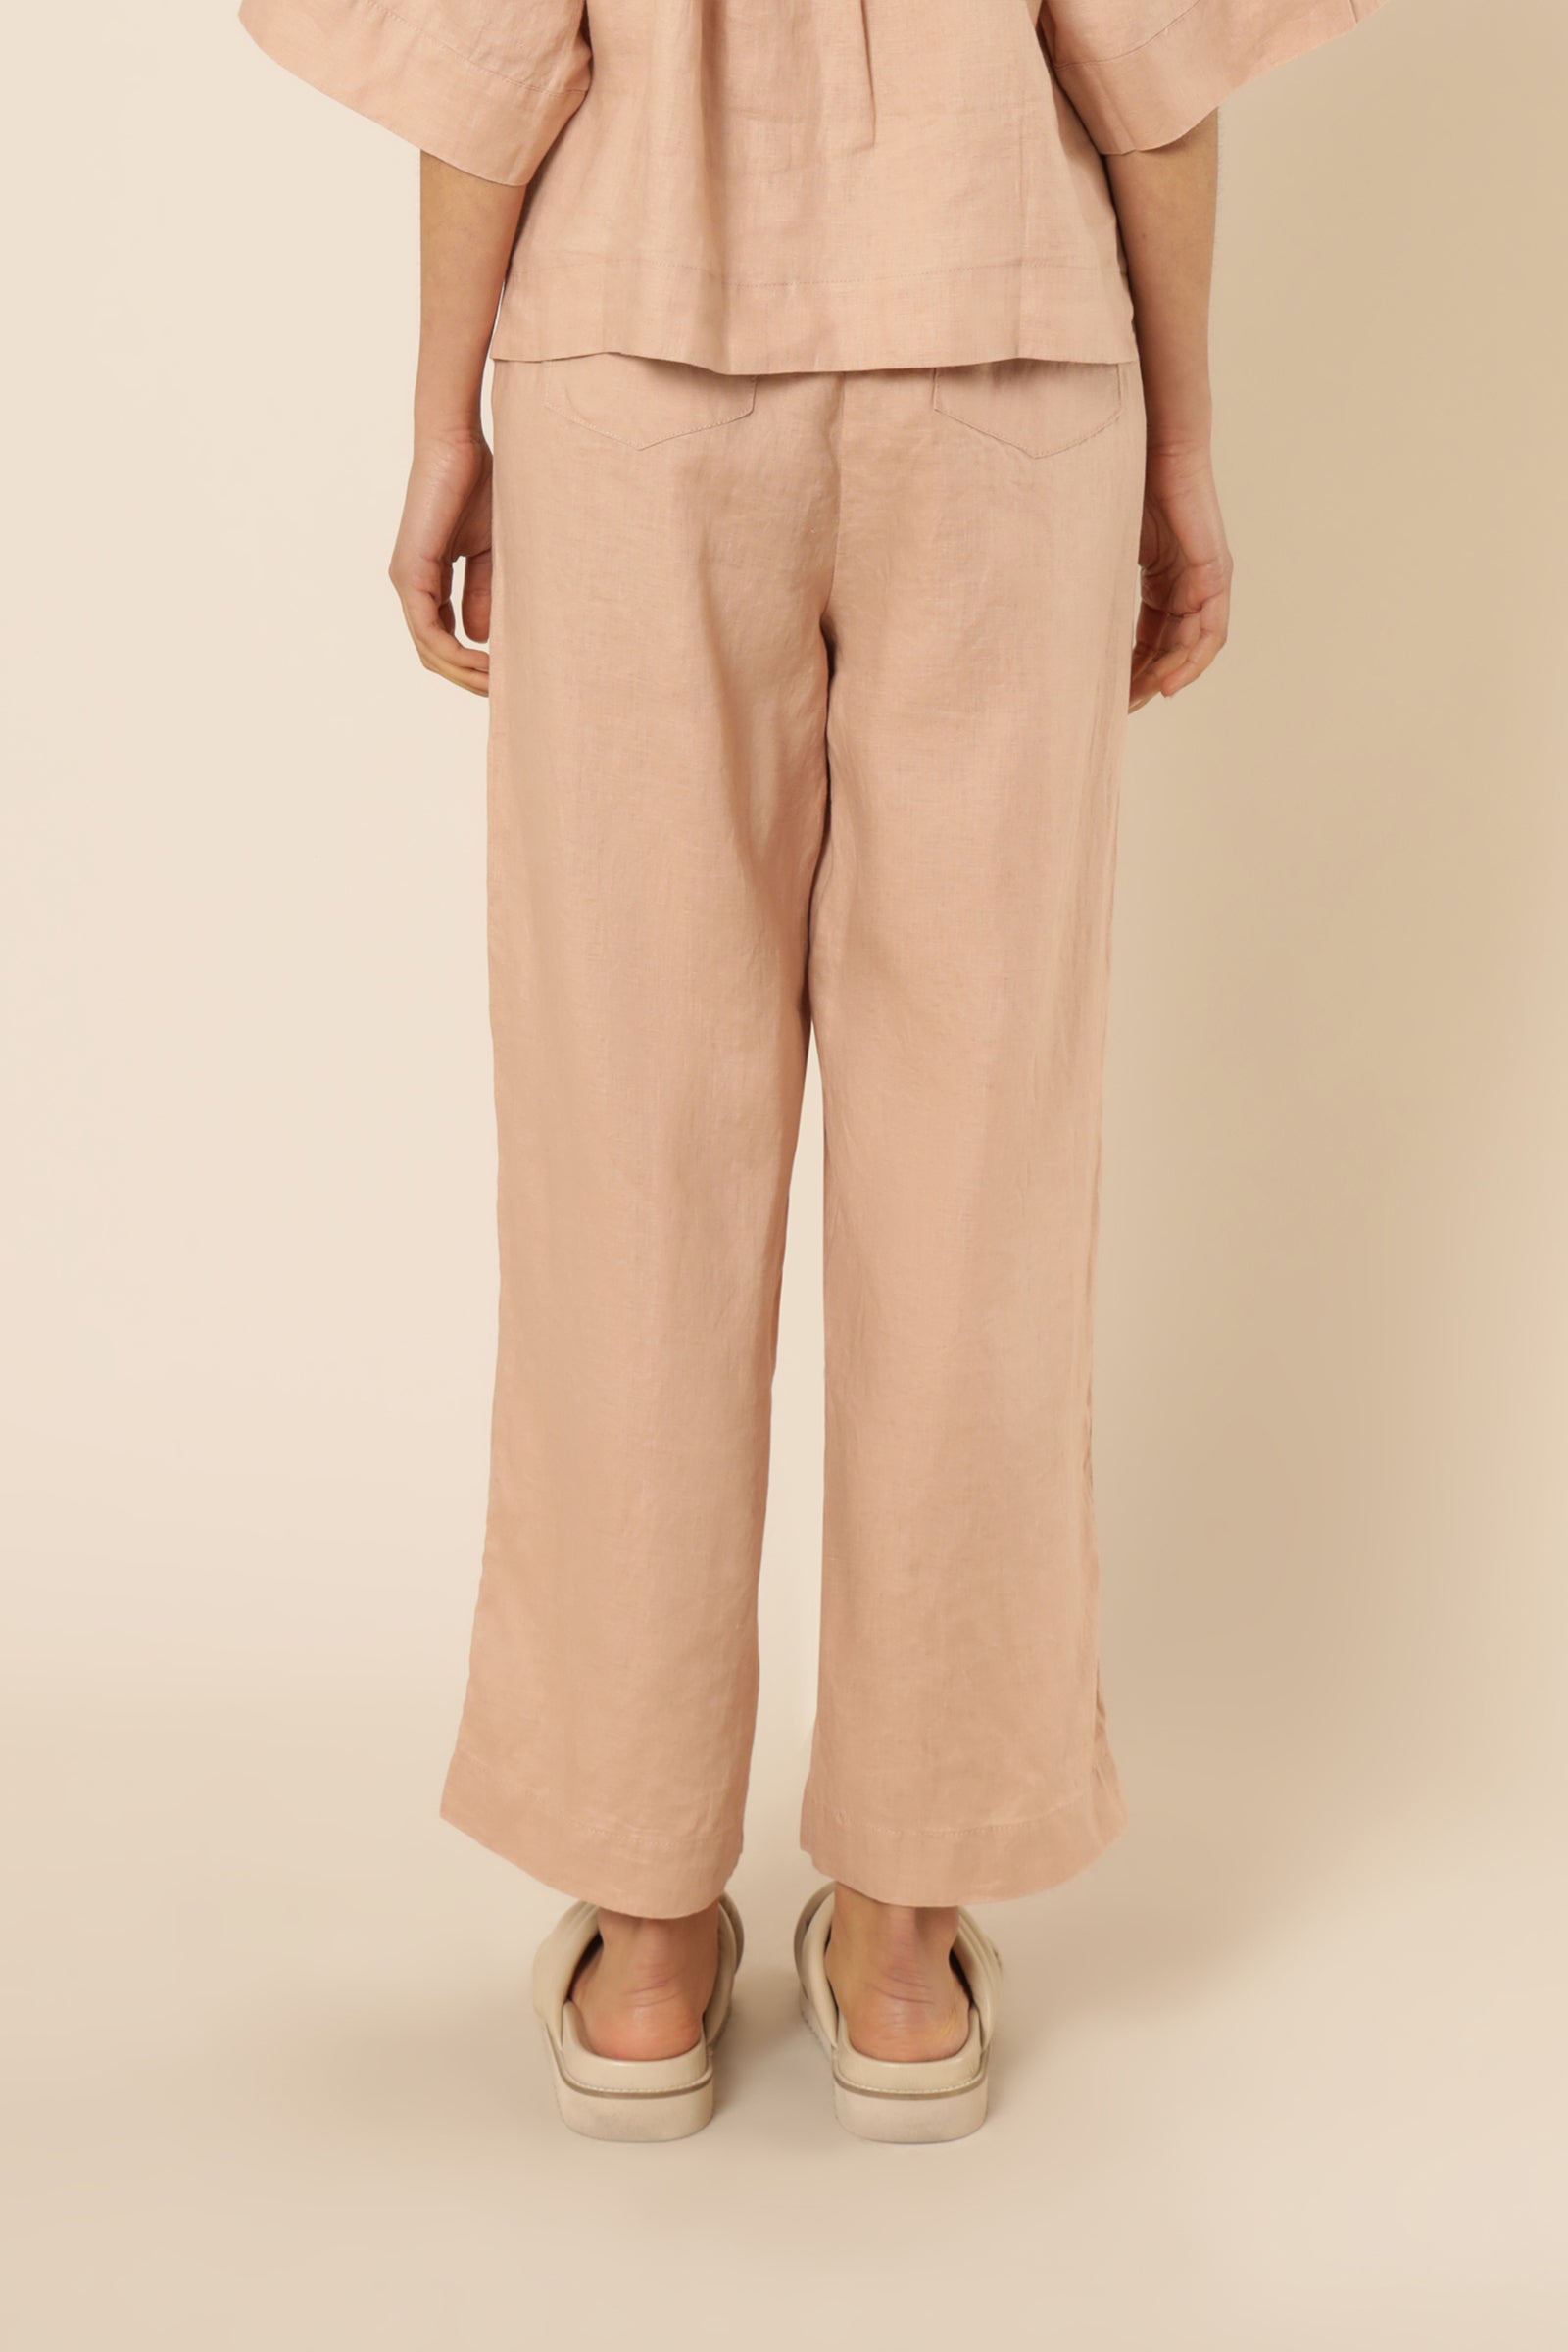 Nude Lucy Nude Lounge Linen Crop Pant Clay Pants 